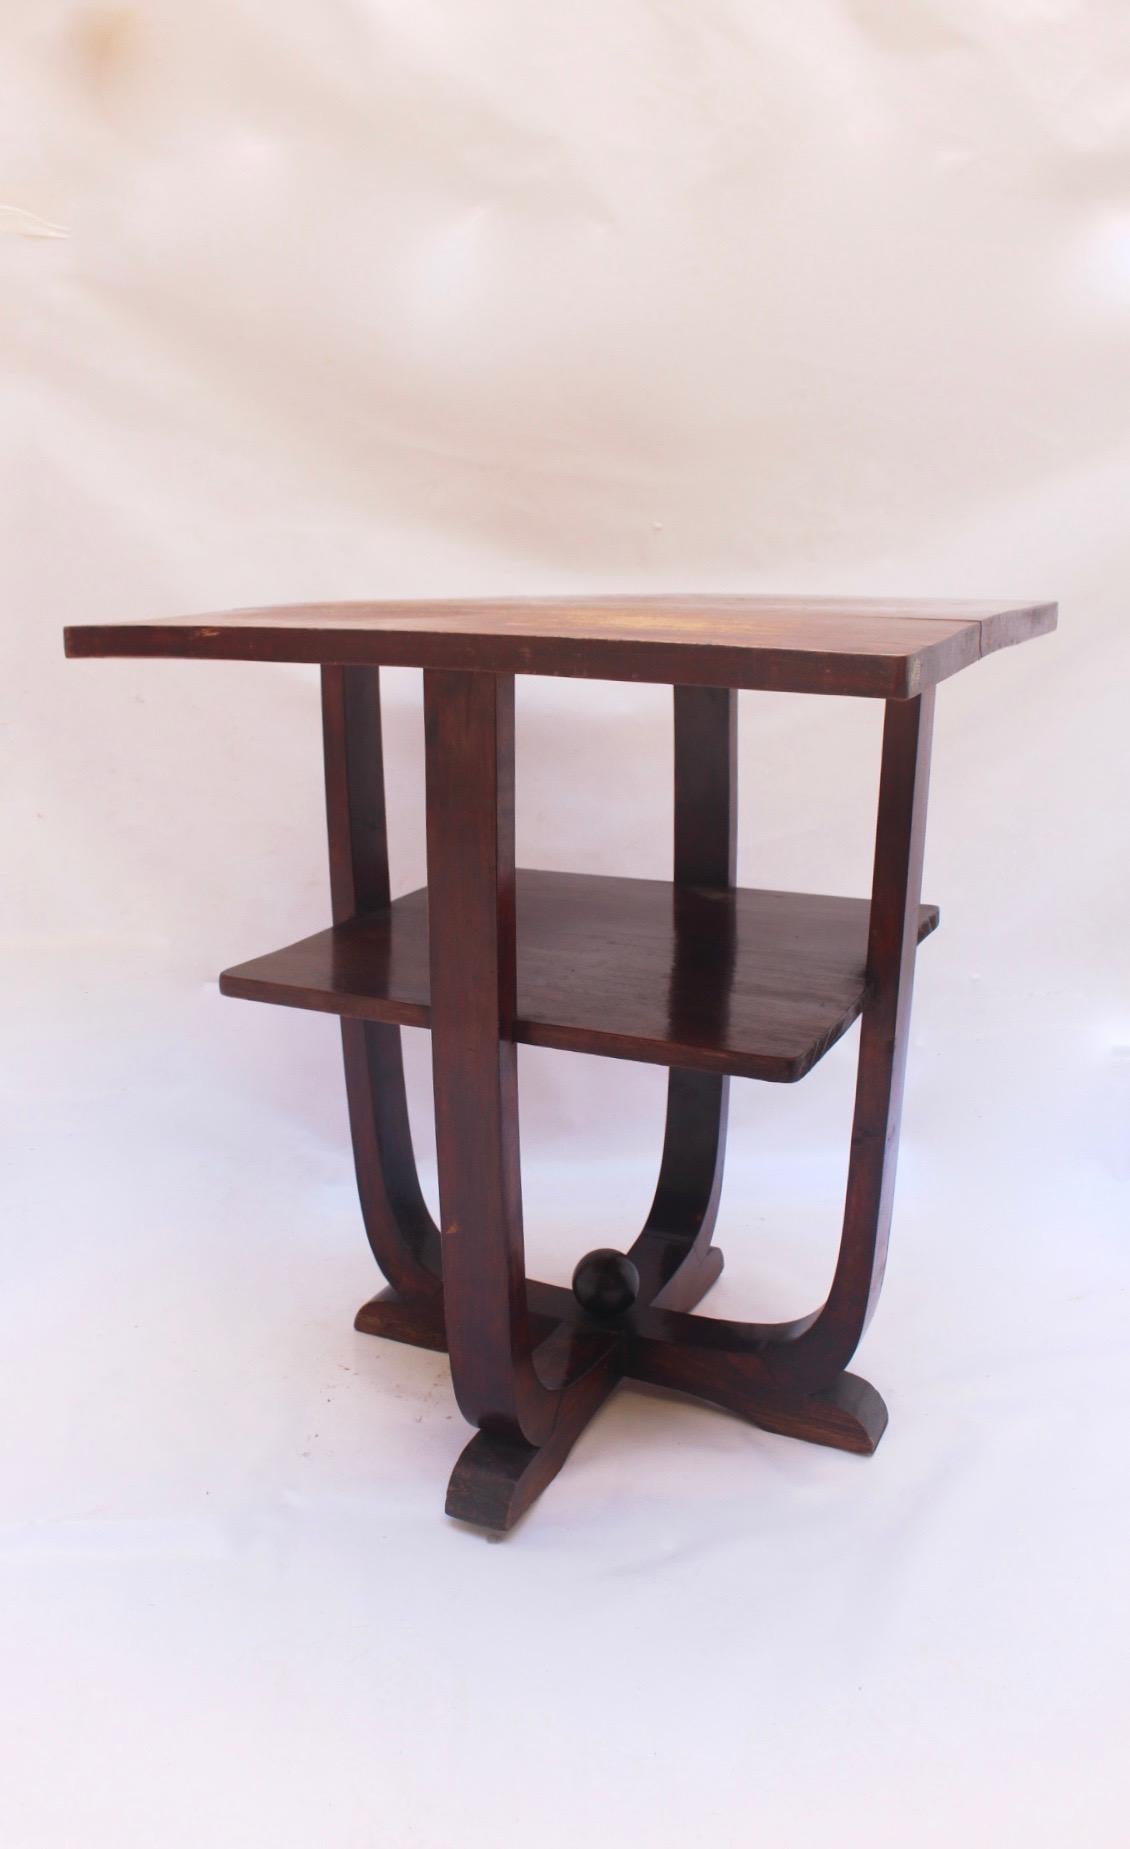 Art Deco square 2-tiered Gueridon or side table, Europe, 1930s. 
The piece is signed with pencil underneath.
Classic Art Deco design made in pine wood. 
*The upper table is slightly bent
The beauty of the simple shapes.
